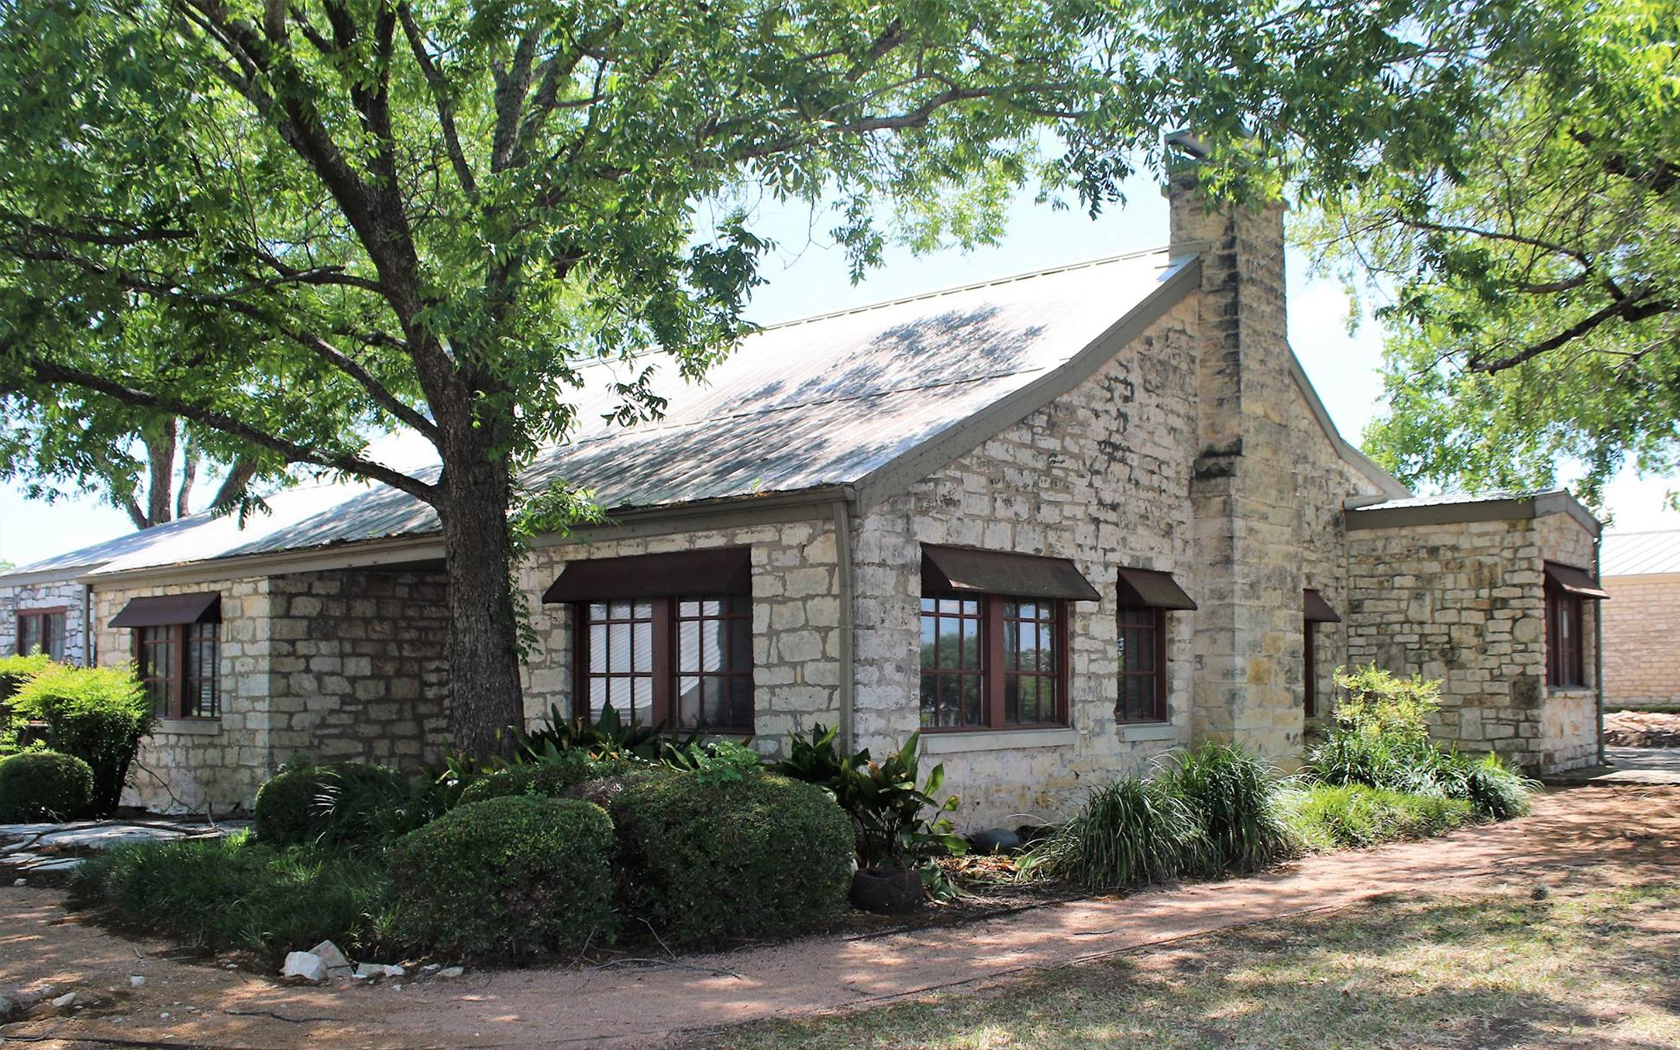 Statesman | Round Rock’s Stagecoach Inn to be relocated, avoid demolition